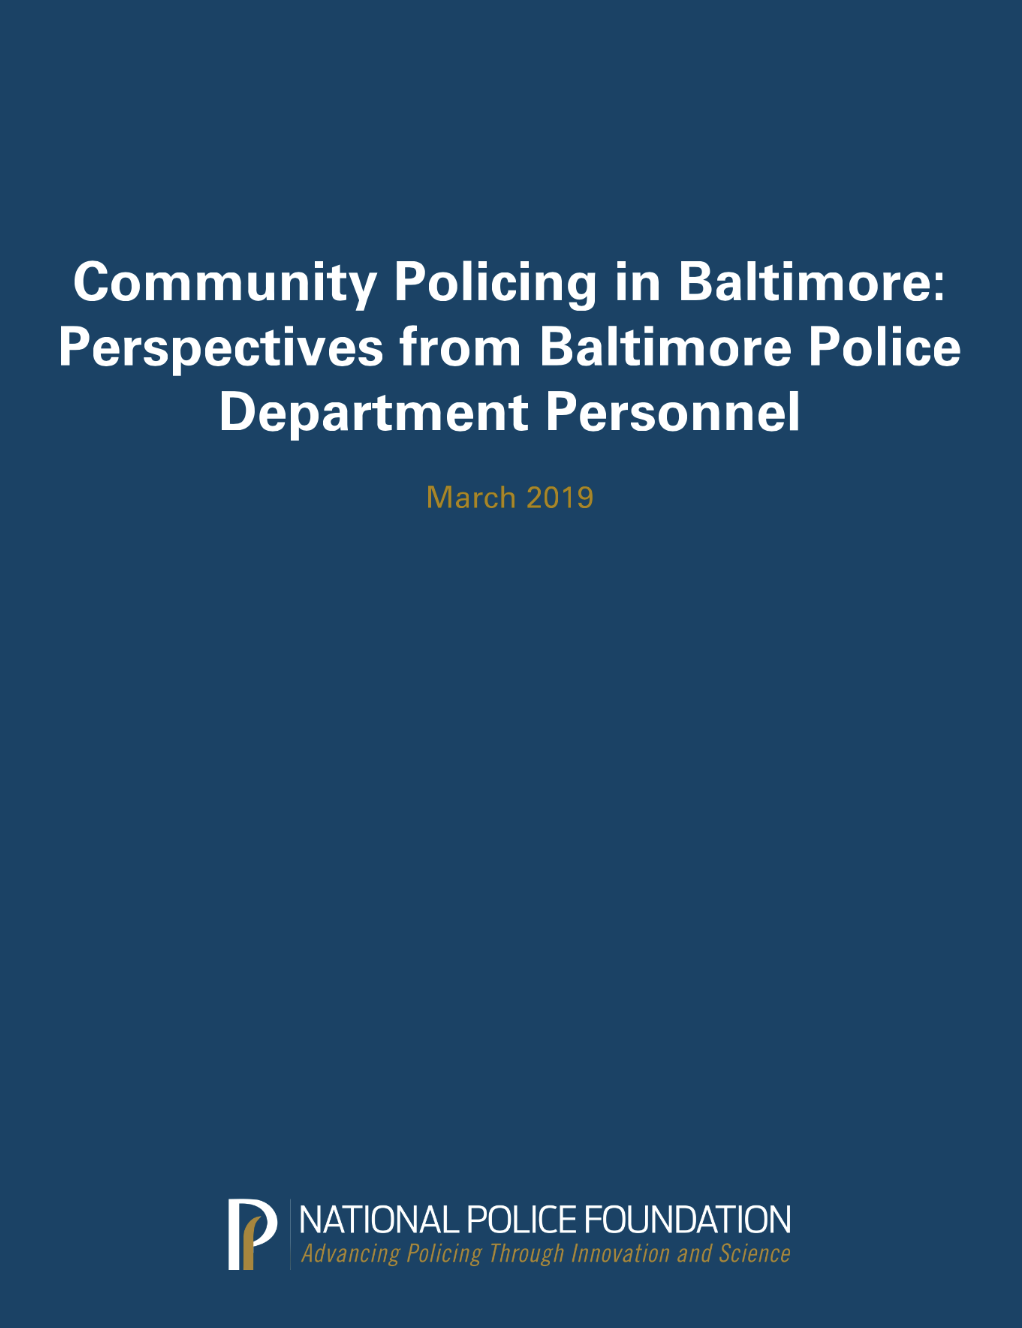 Community policing in baltimore- perspectives from BPD personnel